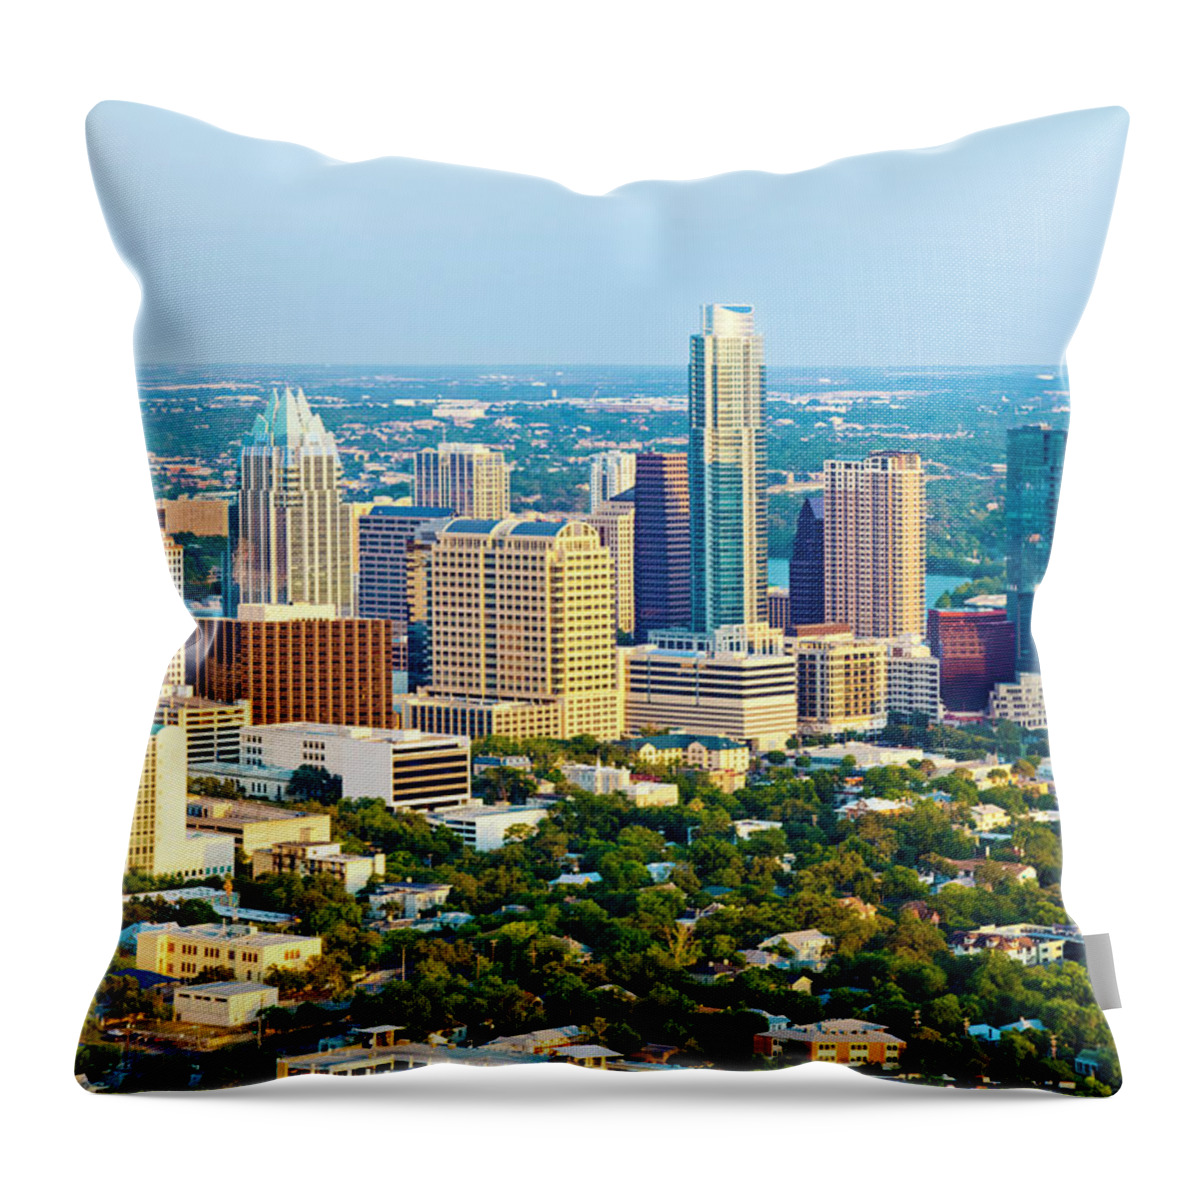 Scenics Throw Pillow featuring the photograph Aerial View Of Austin Texas Skyline In by Dszc